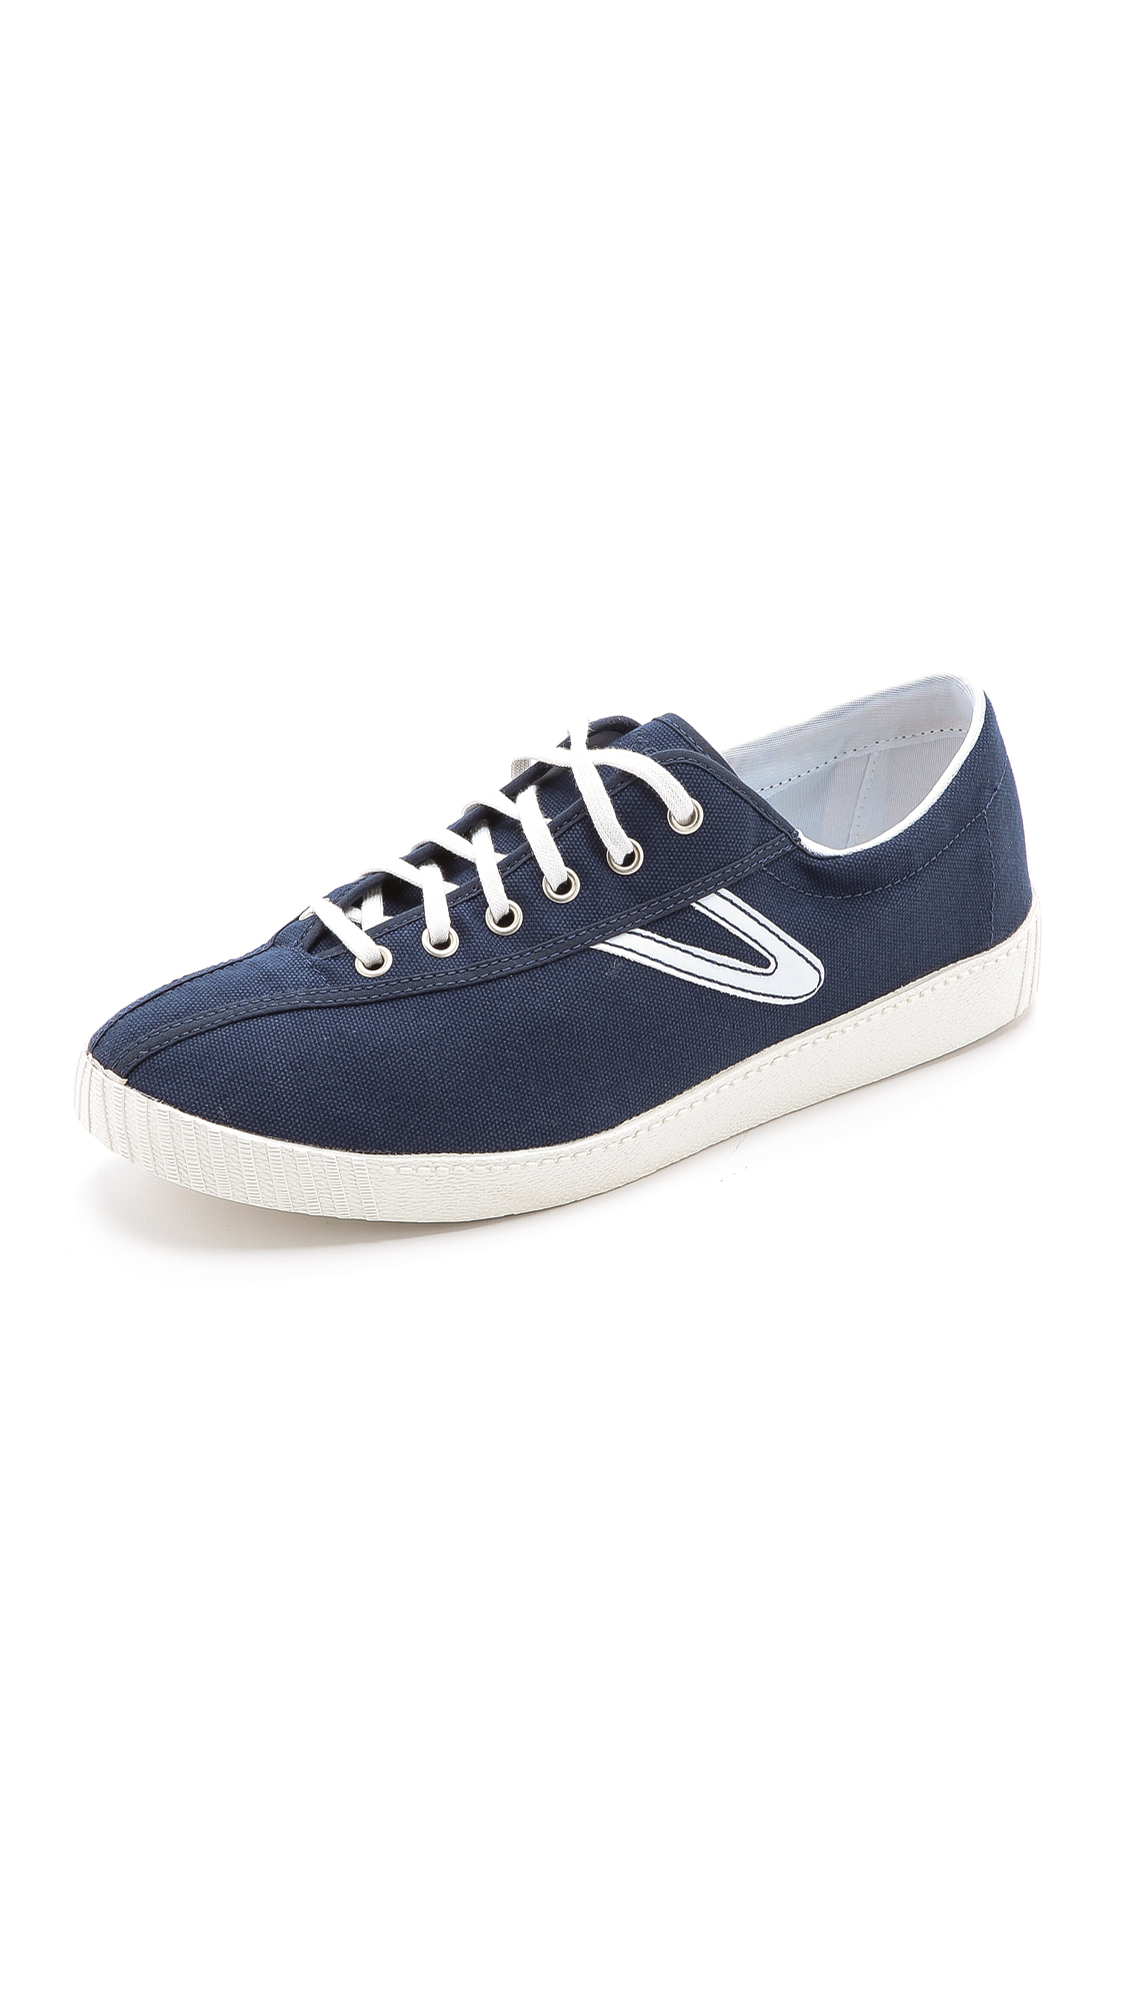 Tretorn Nylite Canvas Sneakers in Navy 